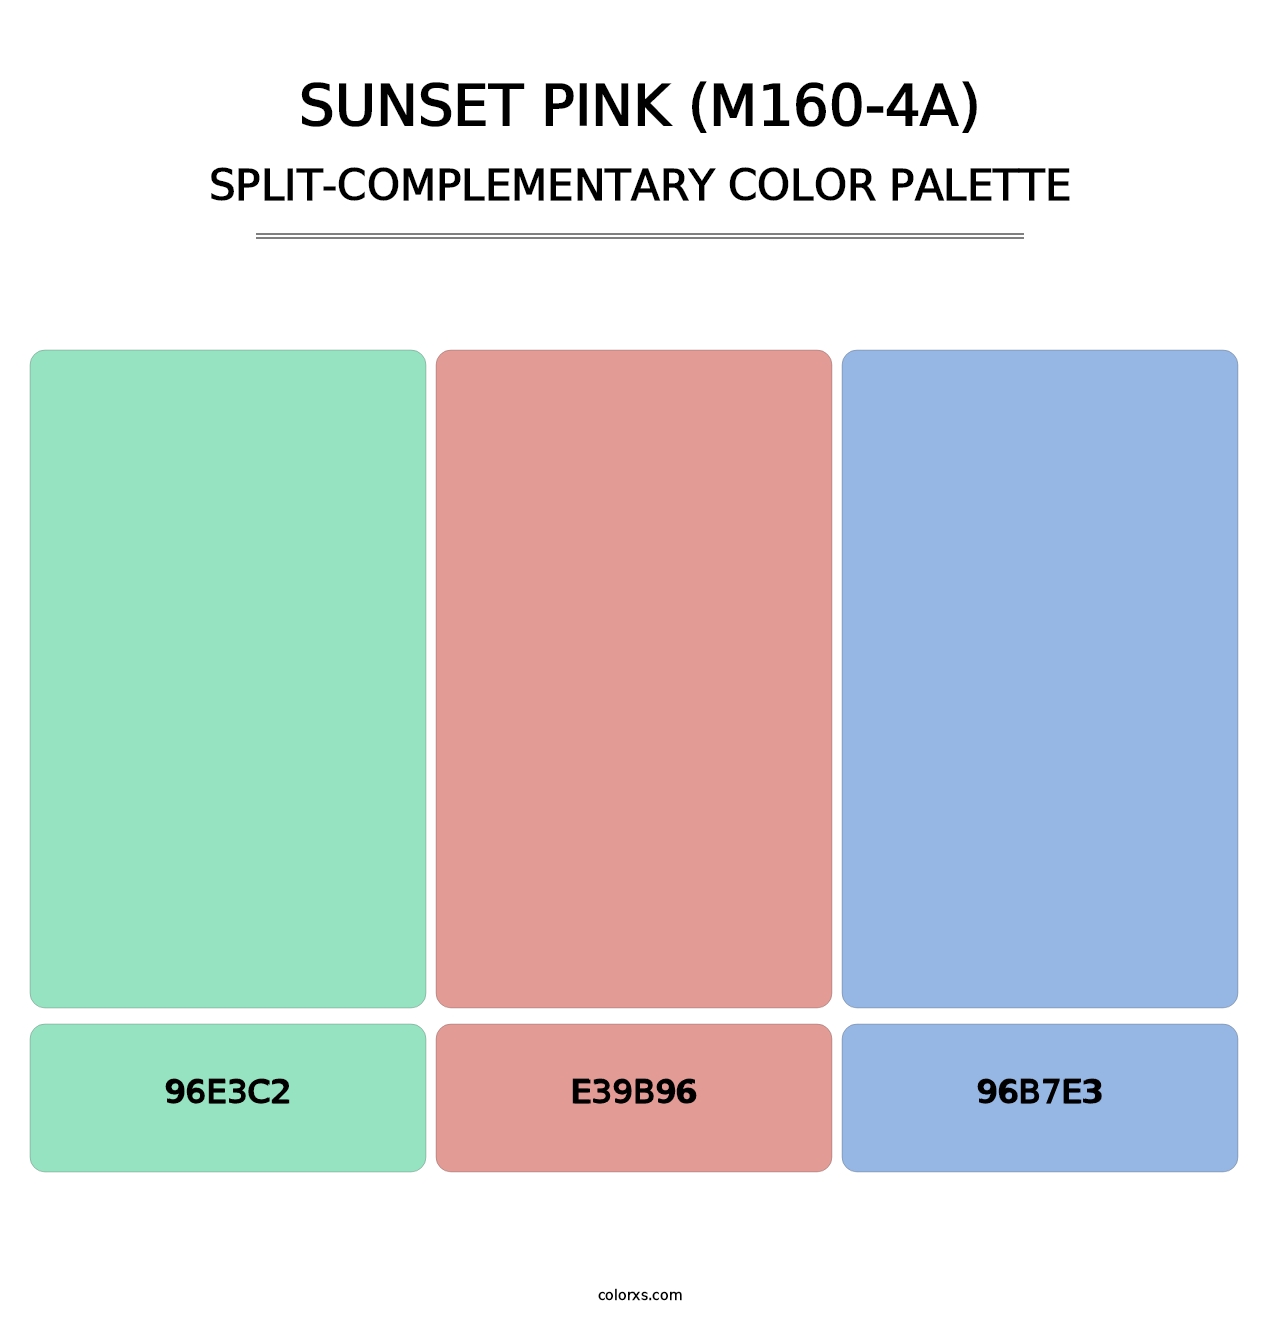 Sunset Pink (M160-4A) - Split-Complementary Color Palette